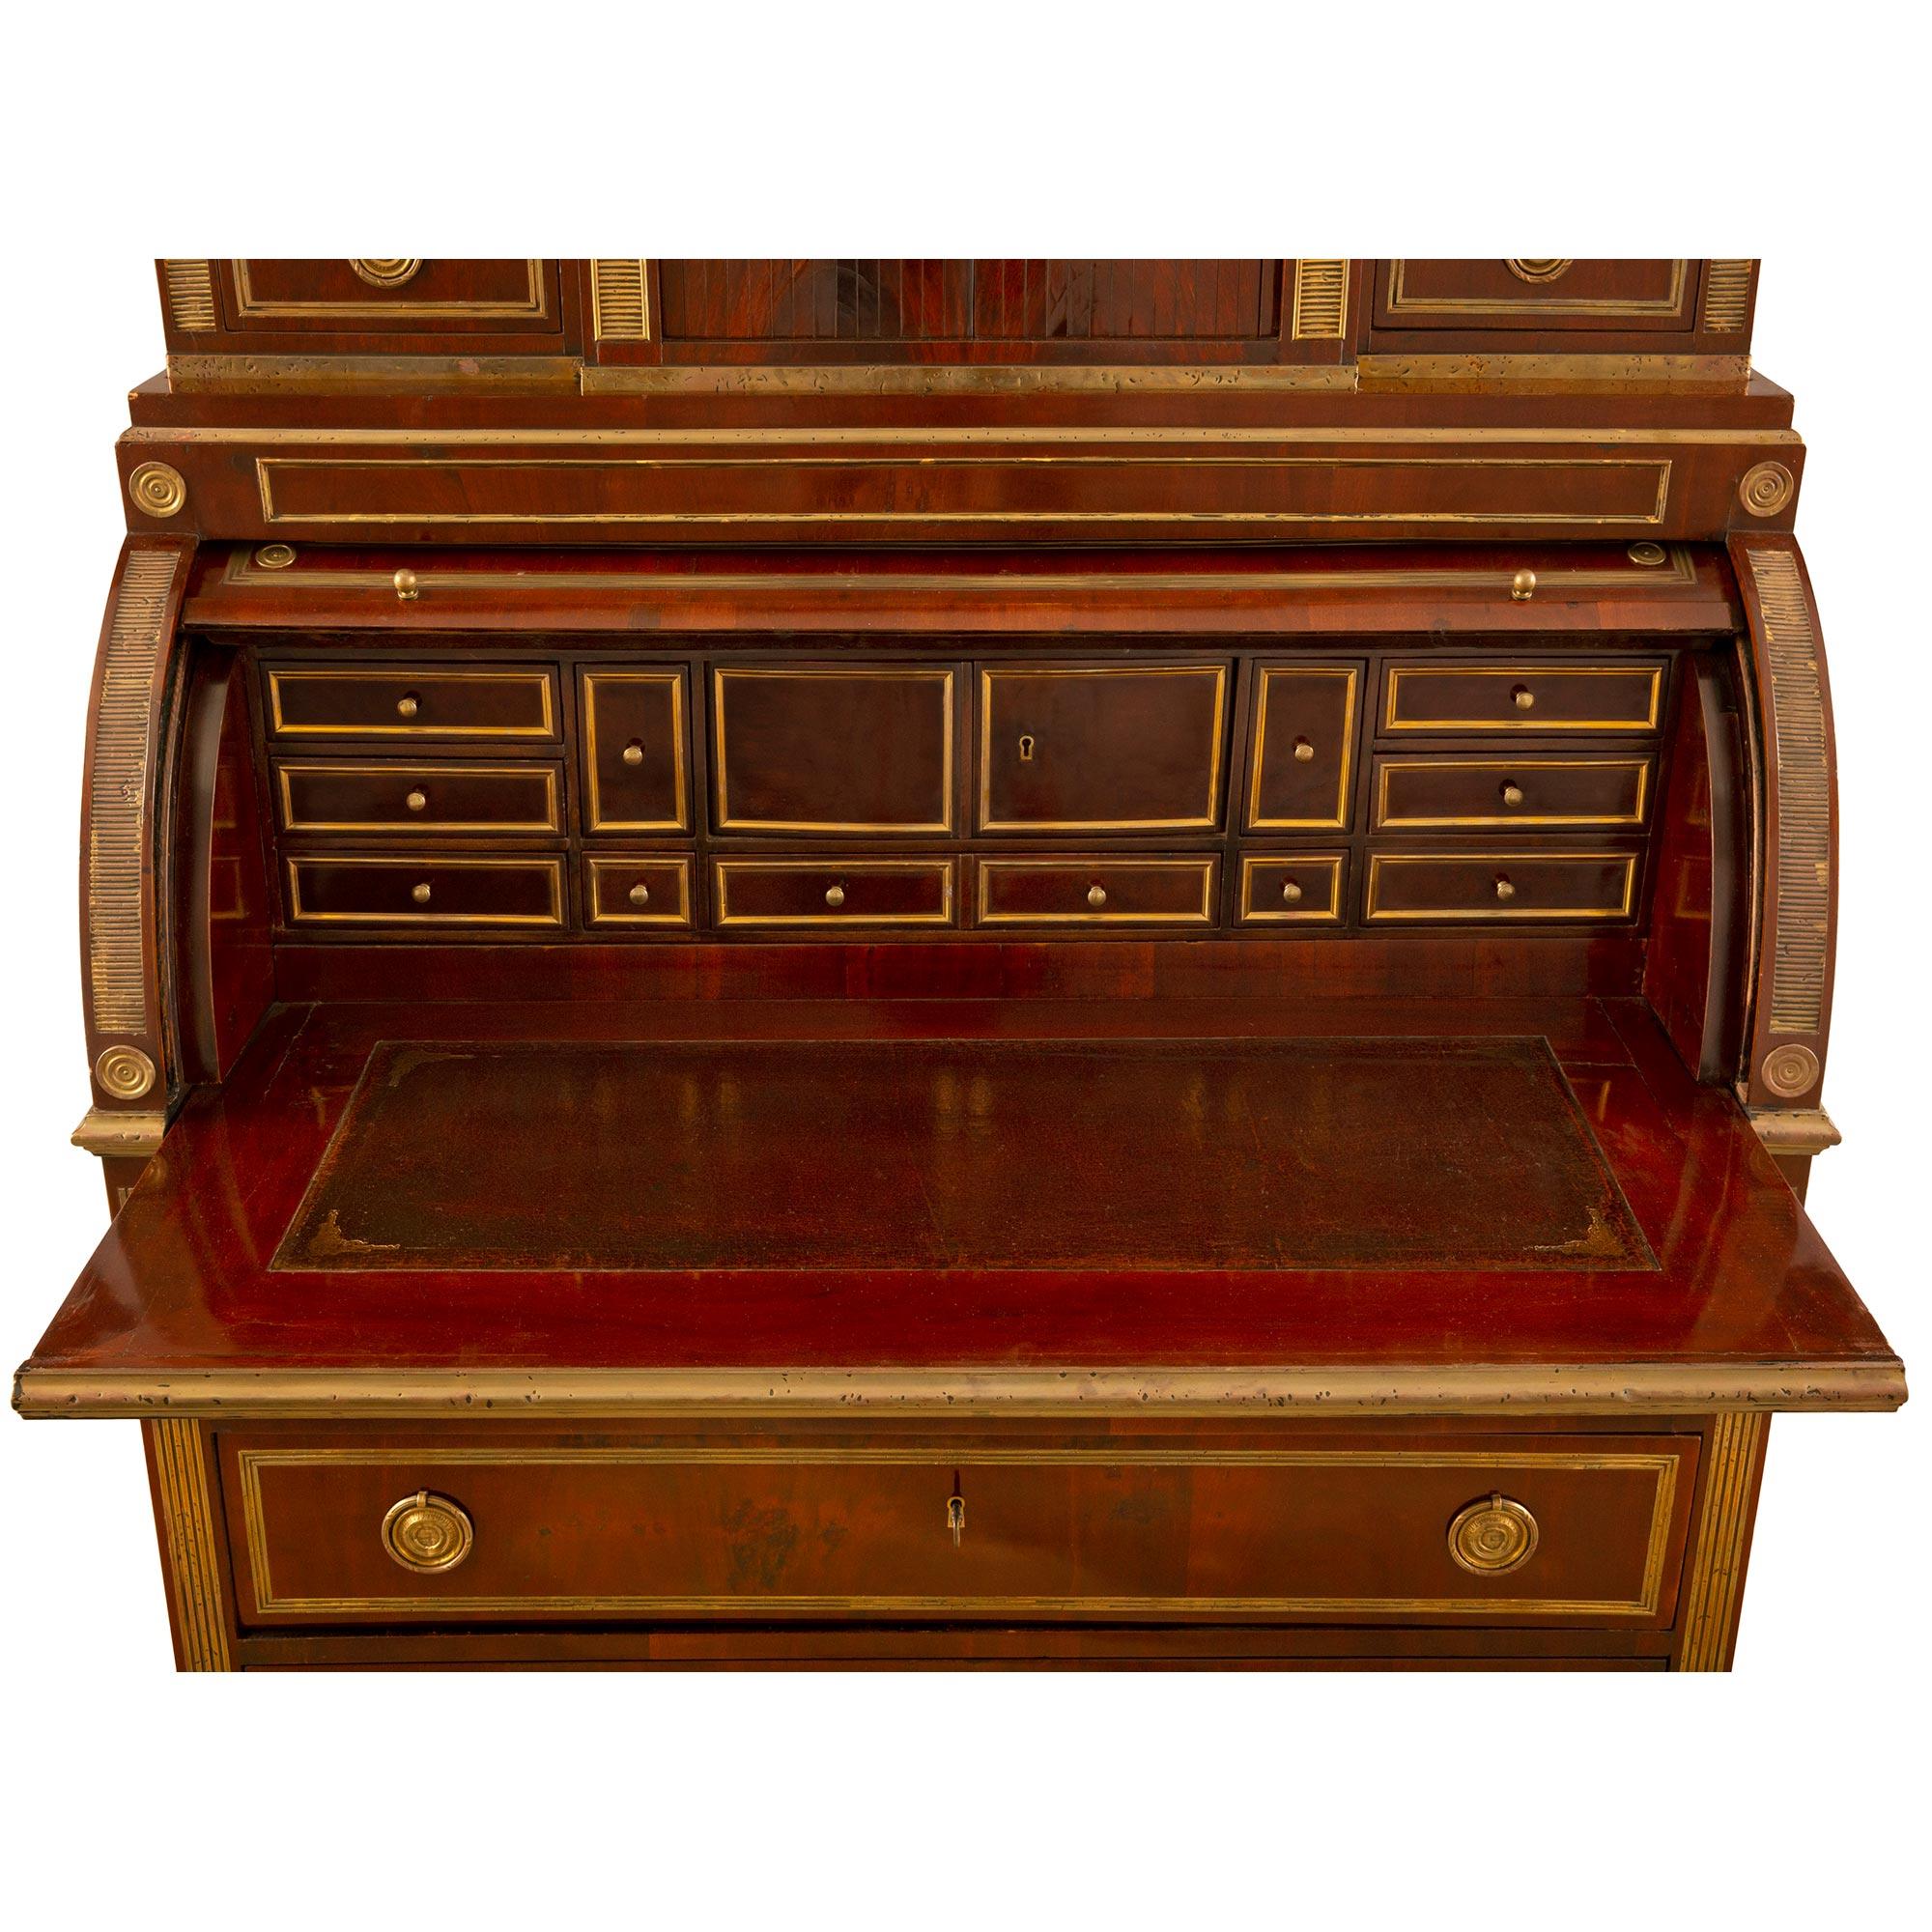 Russian Early 19th Century Empire Style Mahogany 'Bureau a Cylindre' For Sale 6